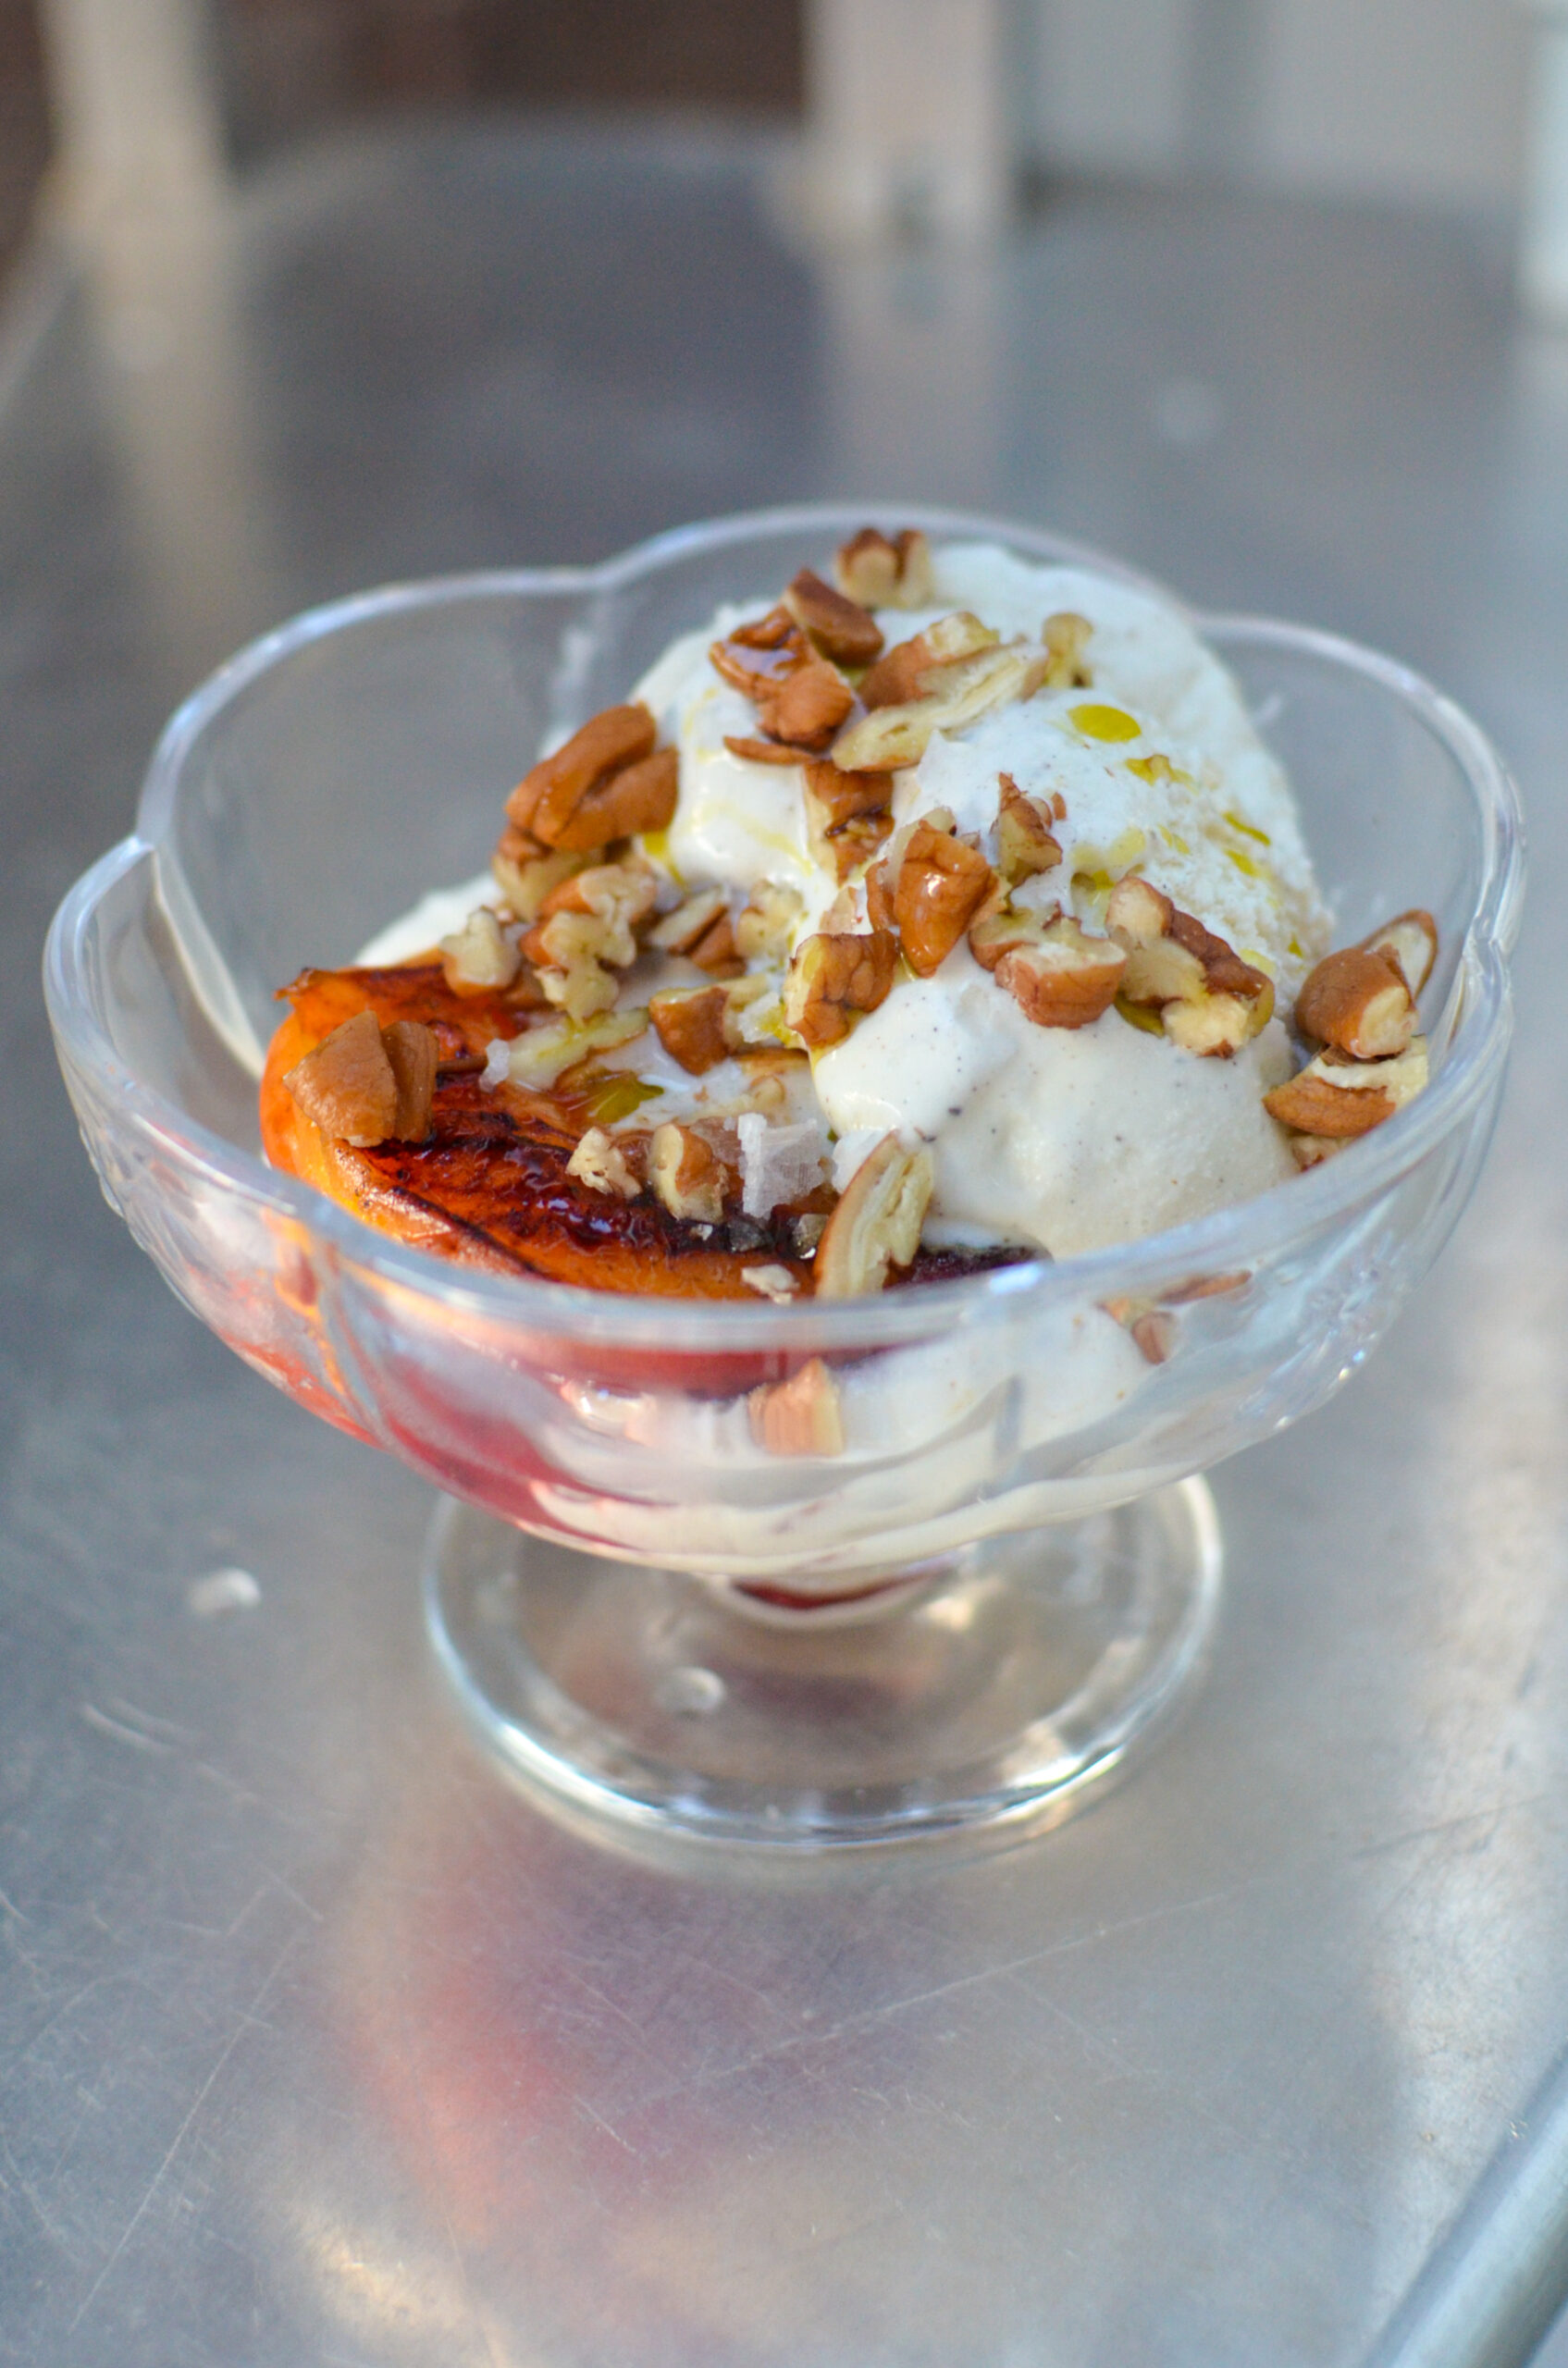 Grilled peaches paired with smooth vanilla ice cream, creating a dessert that screams sunshine and happiness.